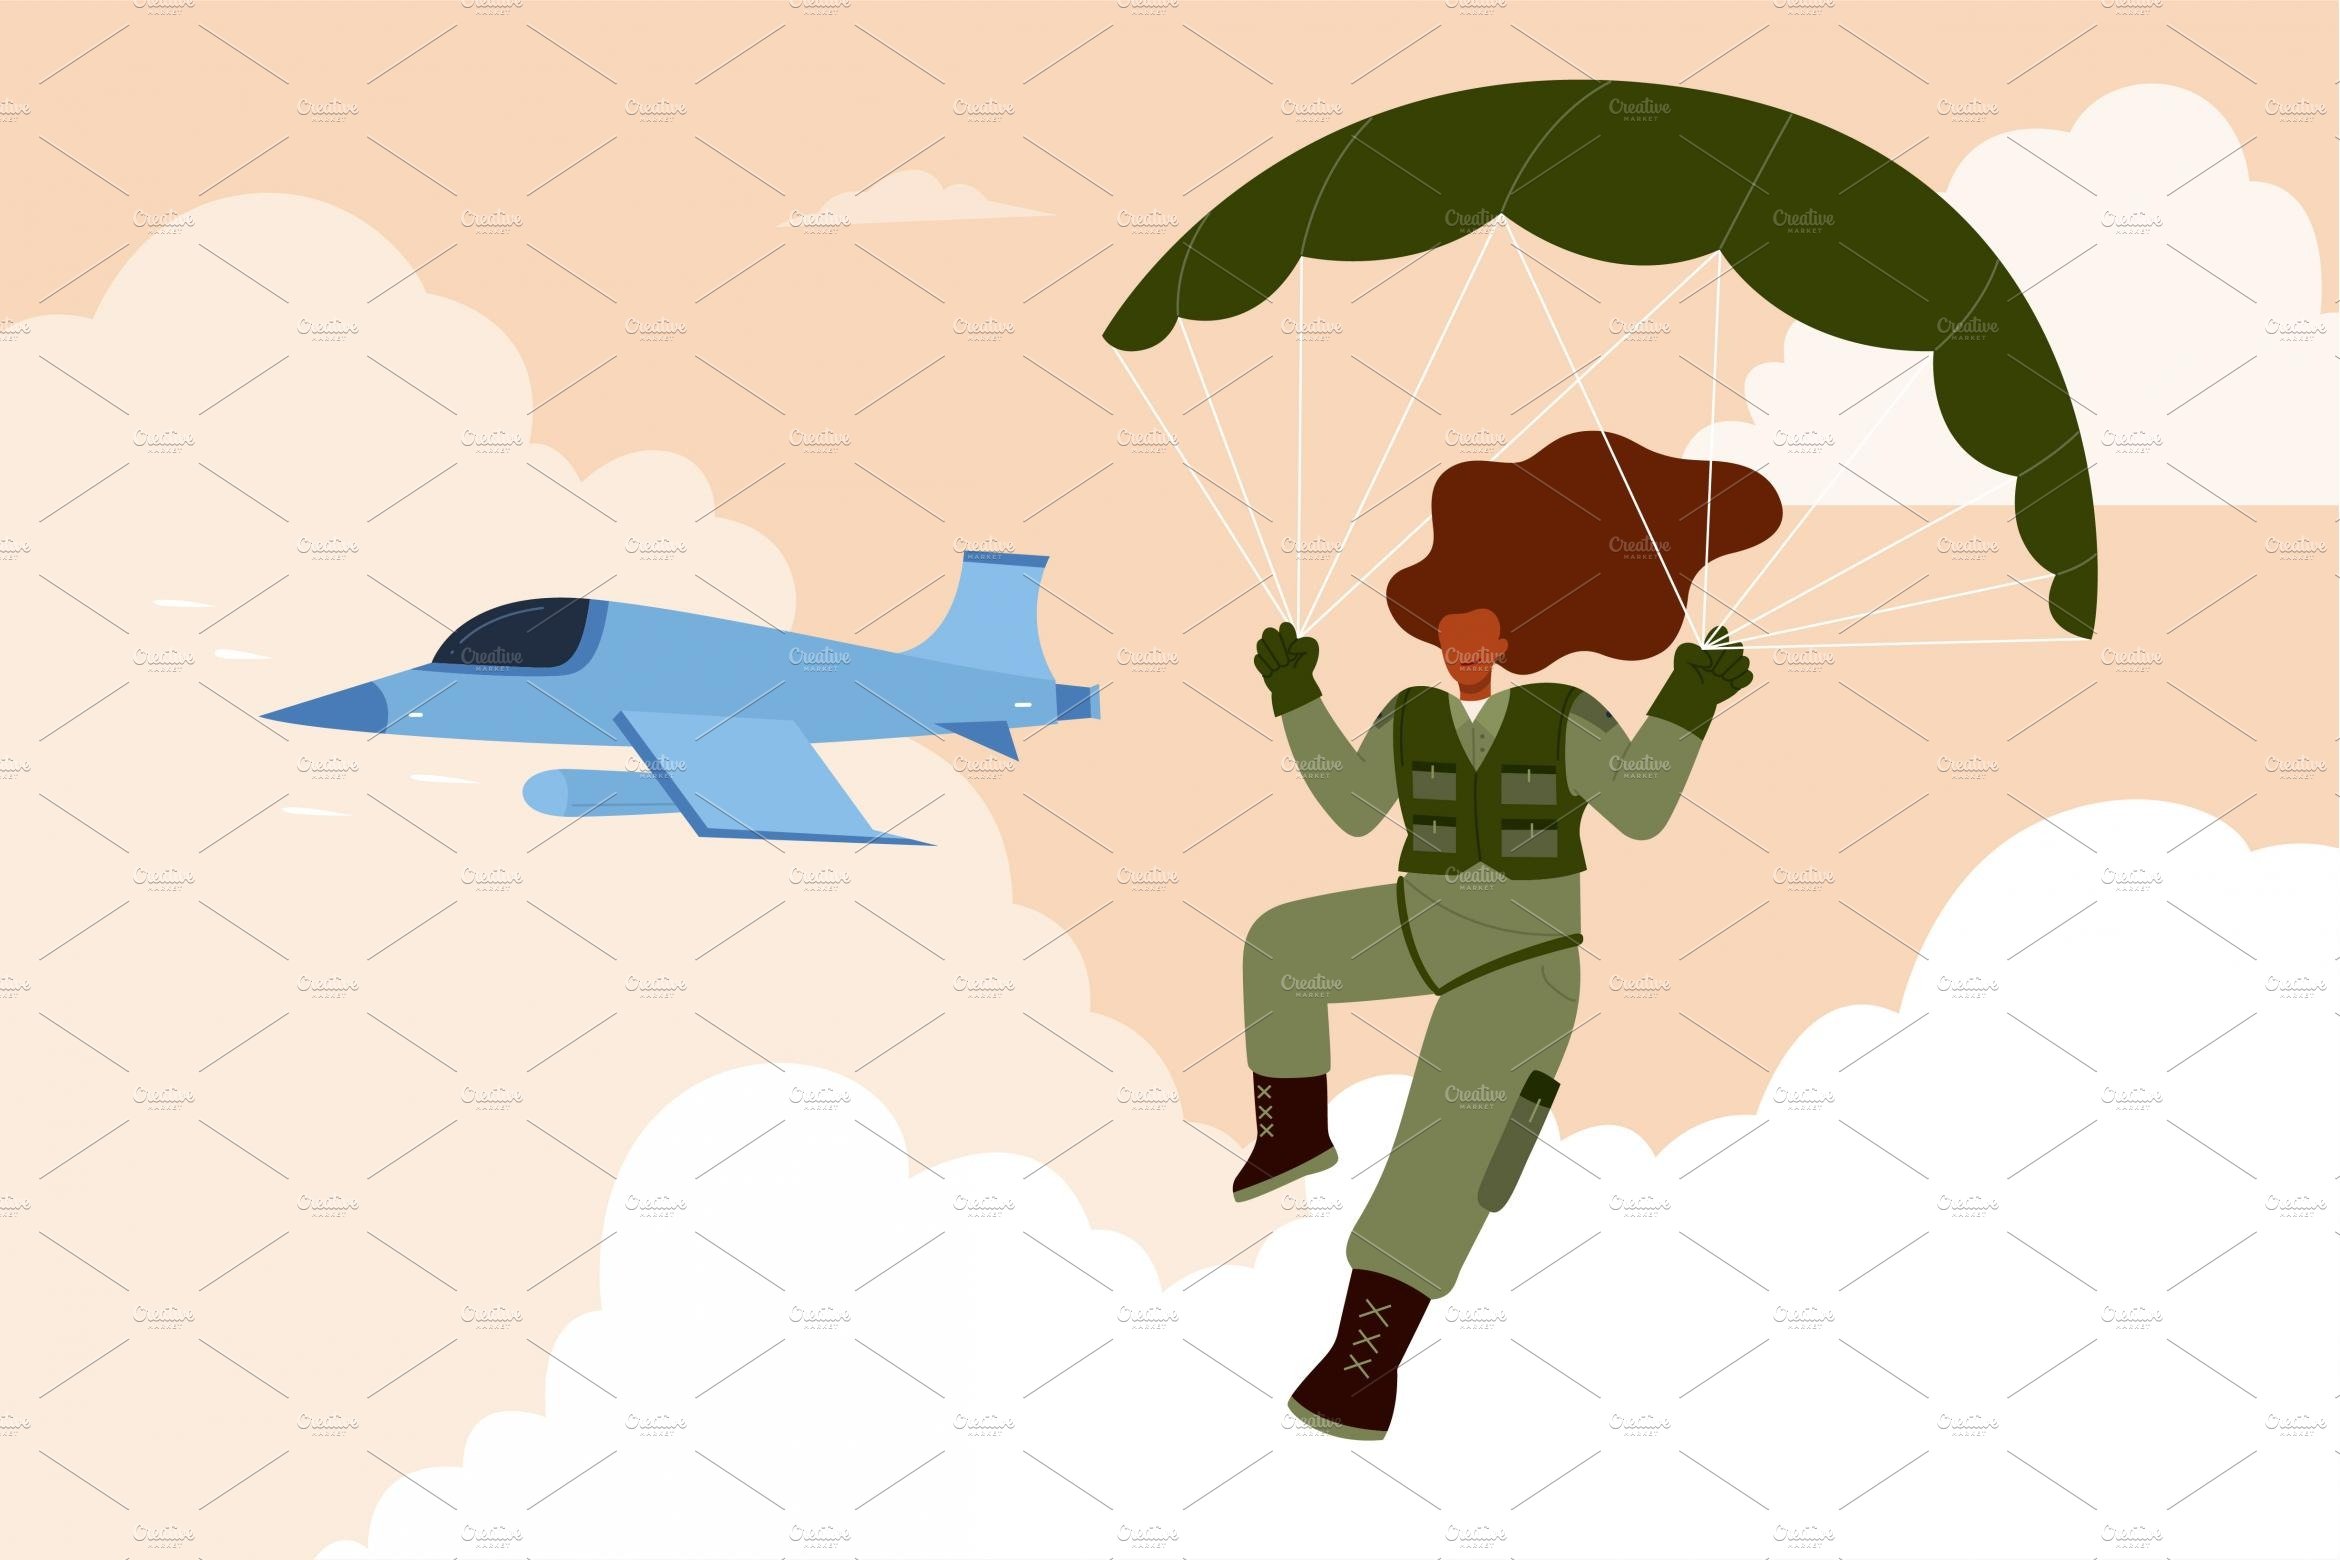 Female paratrooper at work cover image.